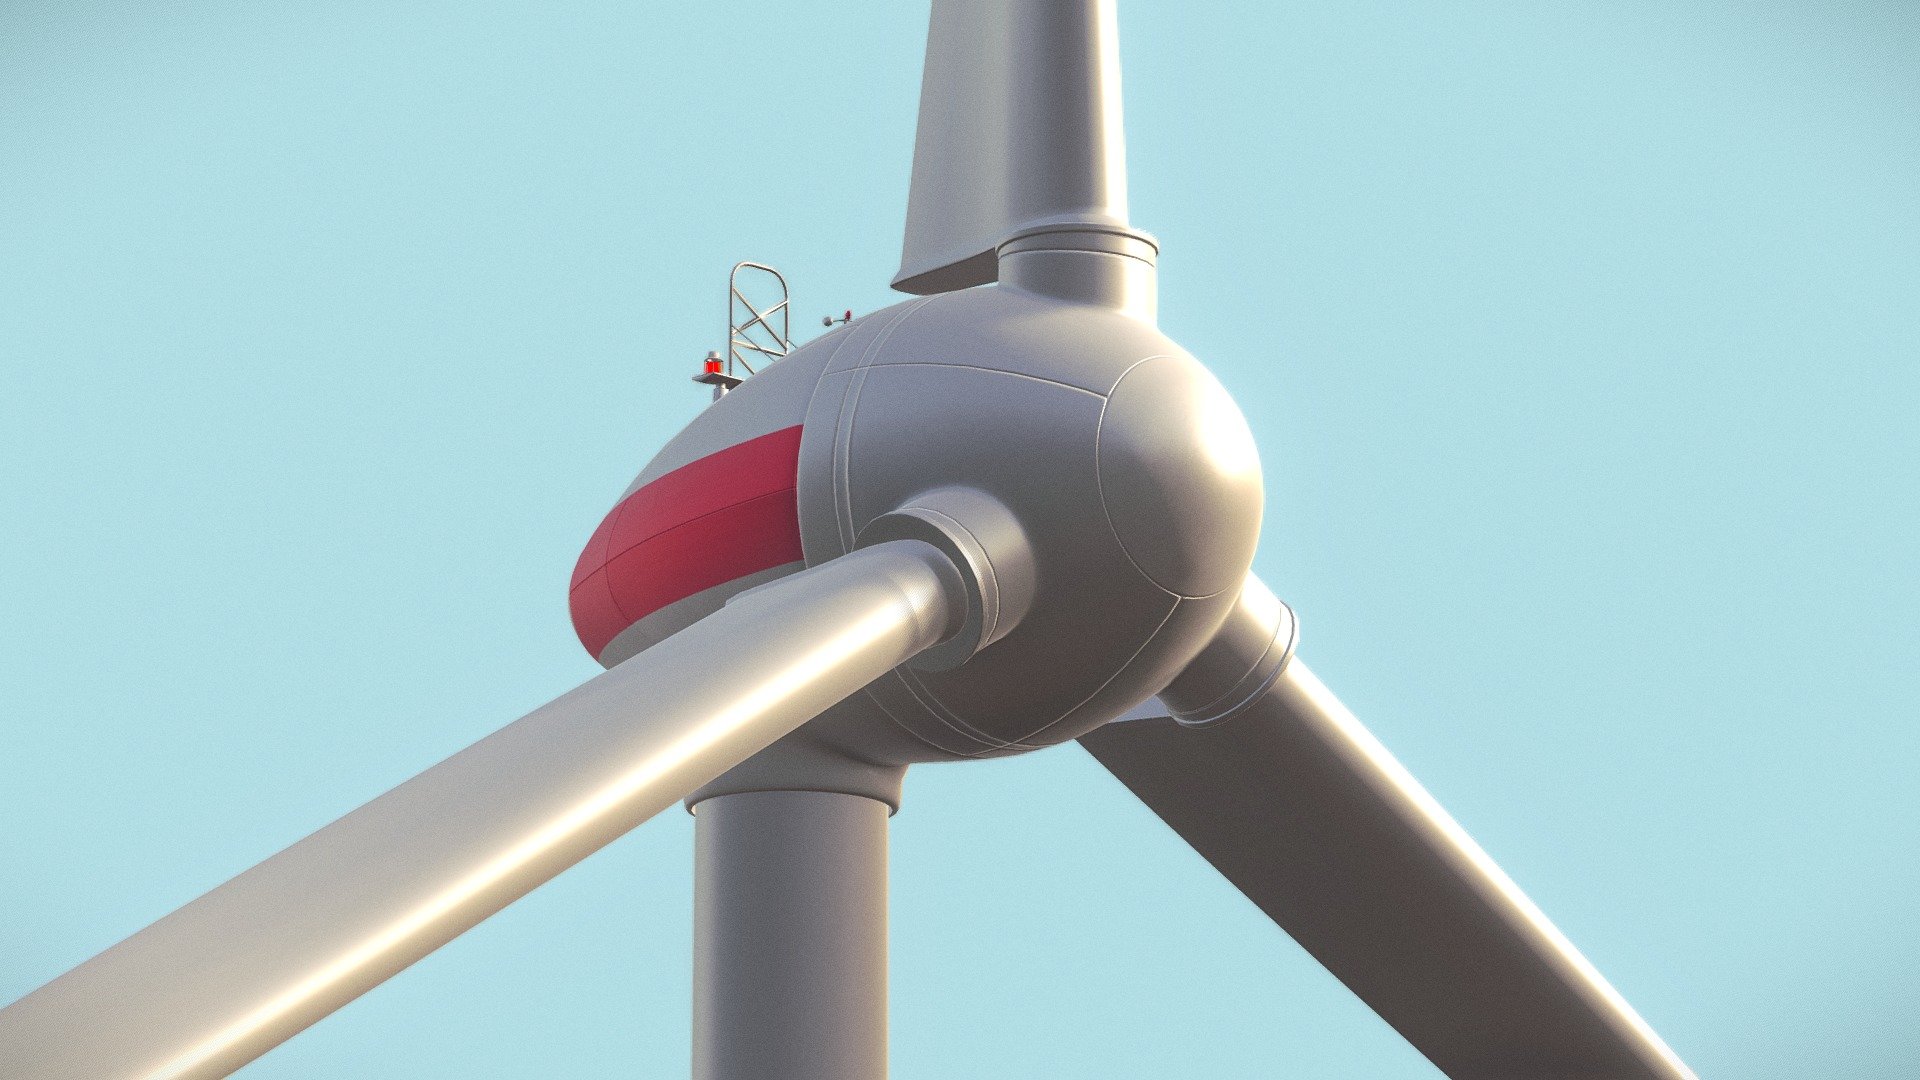 A med- to low-poly turbine. The model is fully UV-Unwrapped with PBR-textures that await your customization.  Seperate Subobjects to make it's rotational part easily animateable. 

Have fun creating great graphics and animations with this wind-turbine.
Should you use this model in one of your projects I'd be happy if you take the time and send me a link to the finished work.

Make sure to download the &ldquo;Additional File